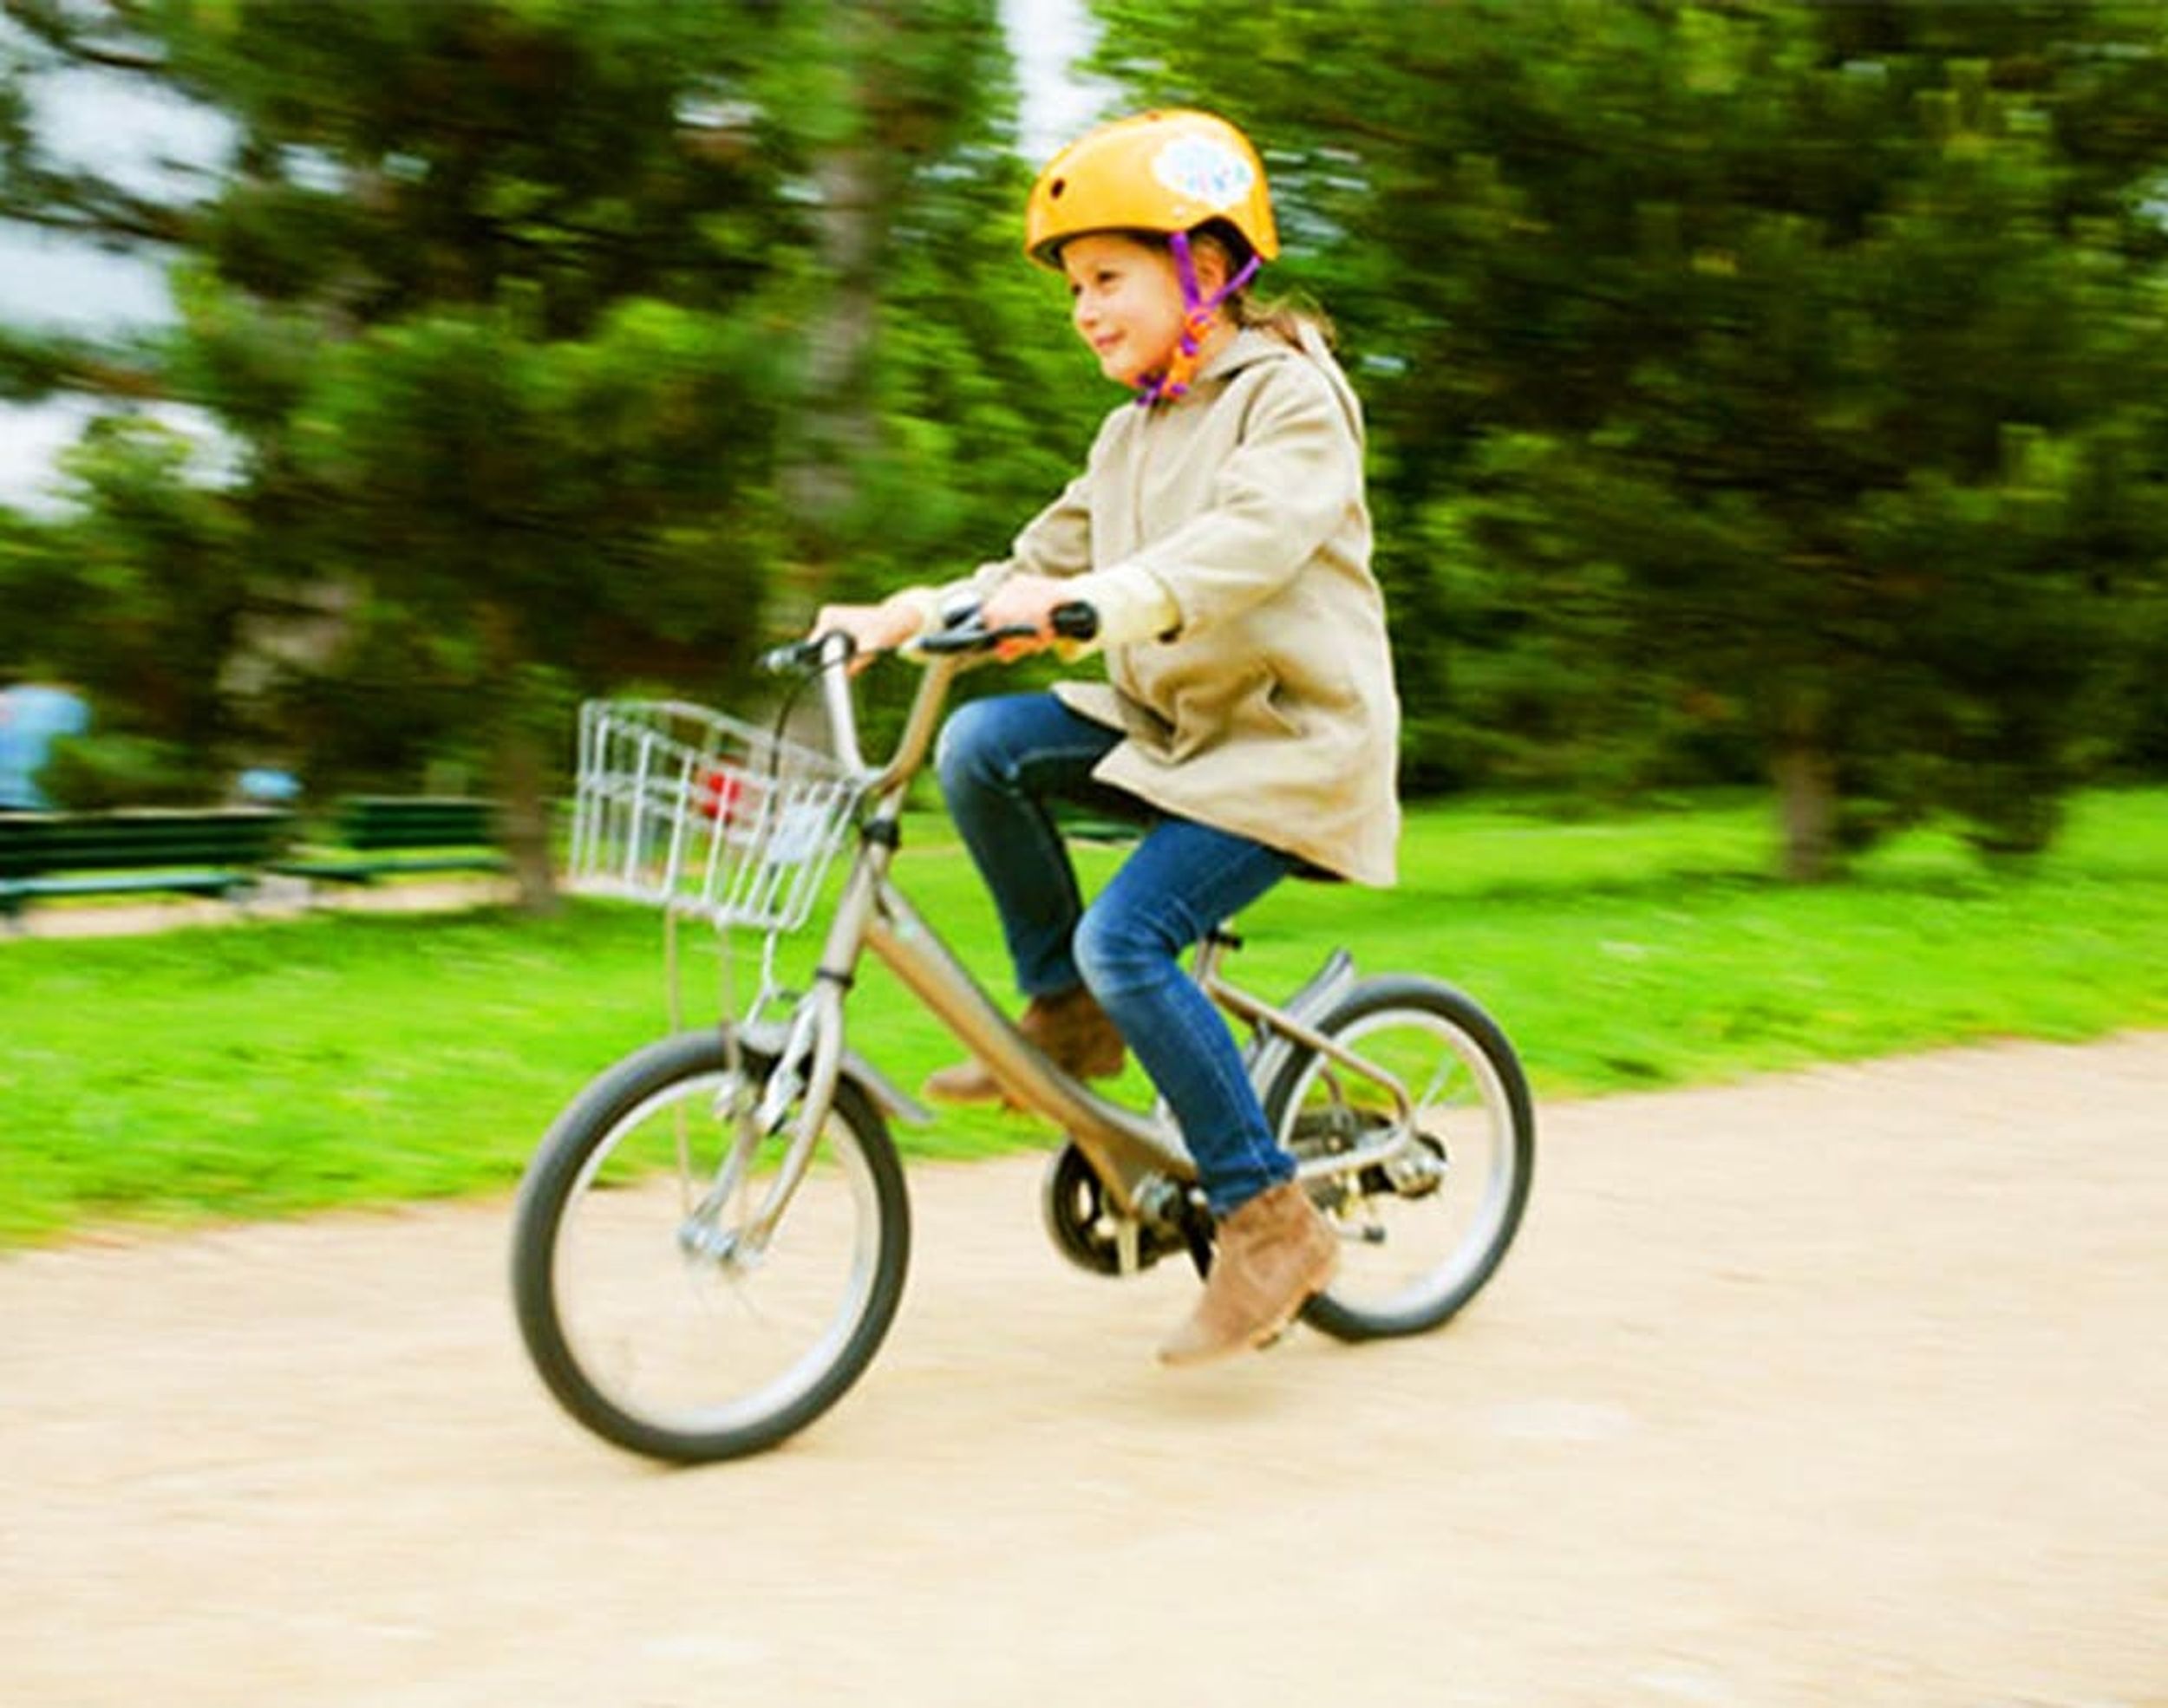 Cute Alert! This Cycle Service Rents Bikes To Kids